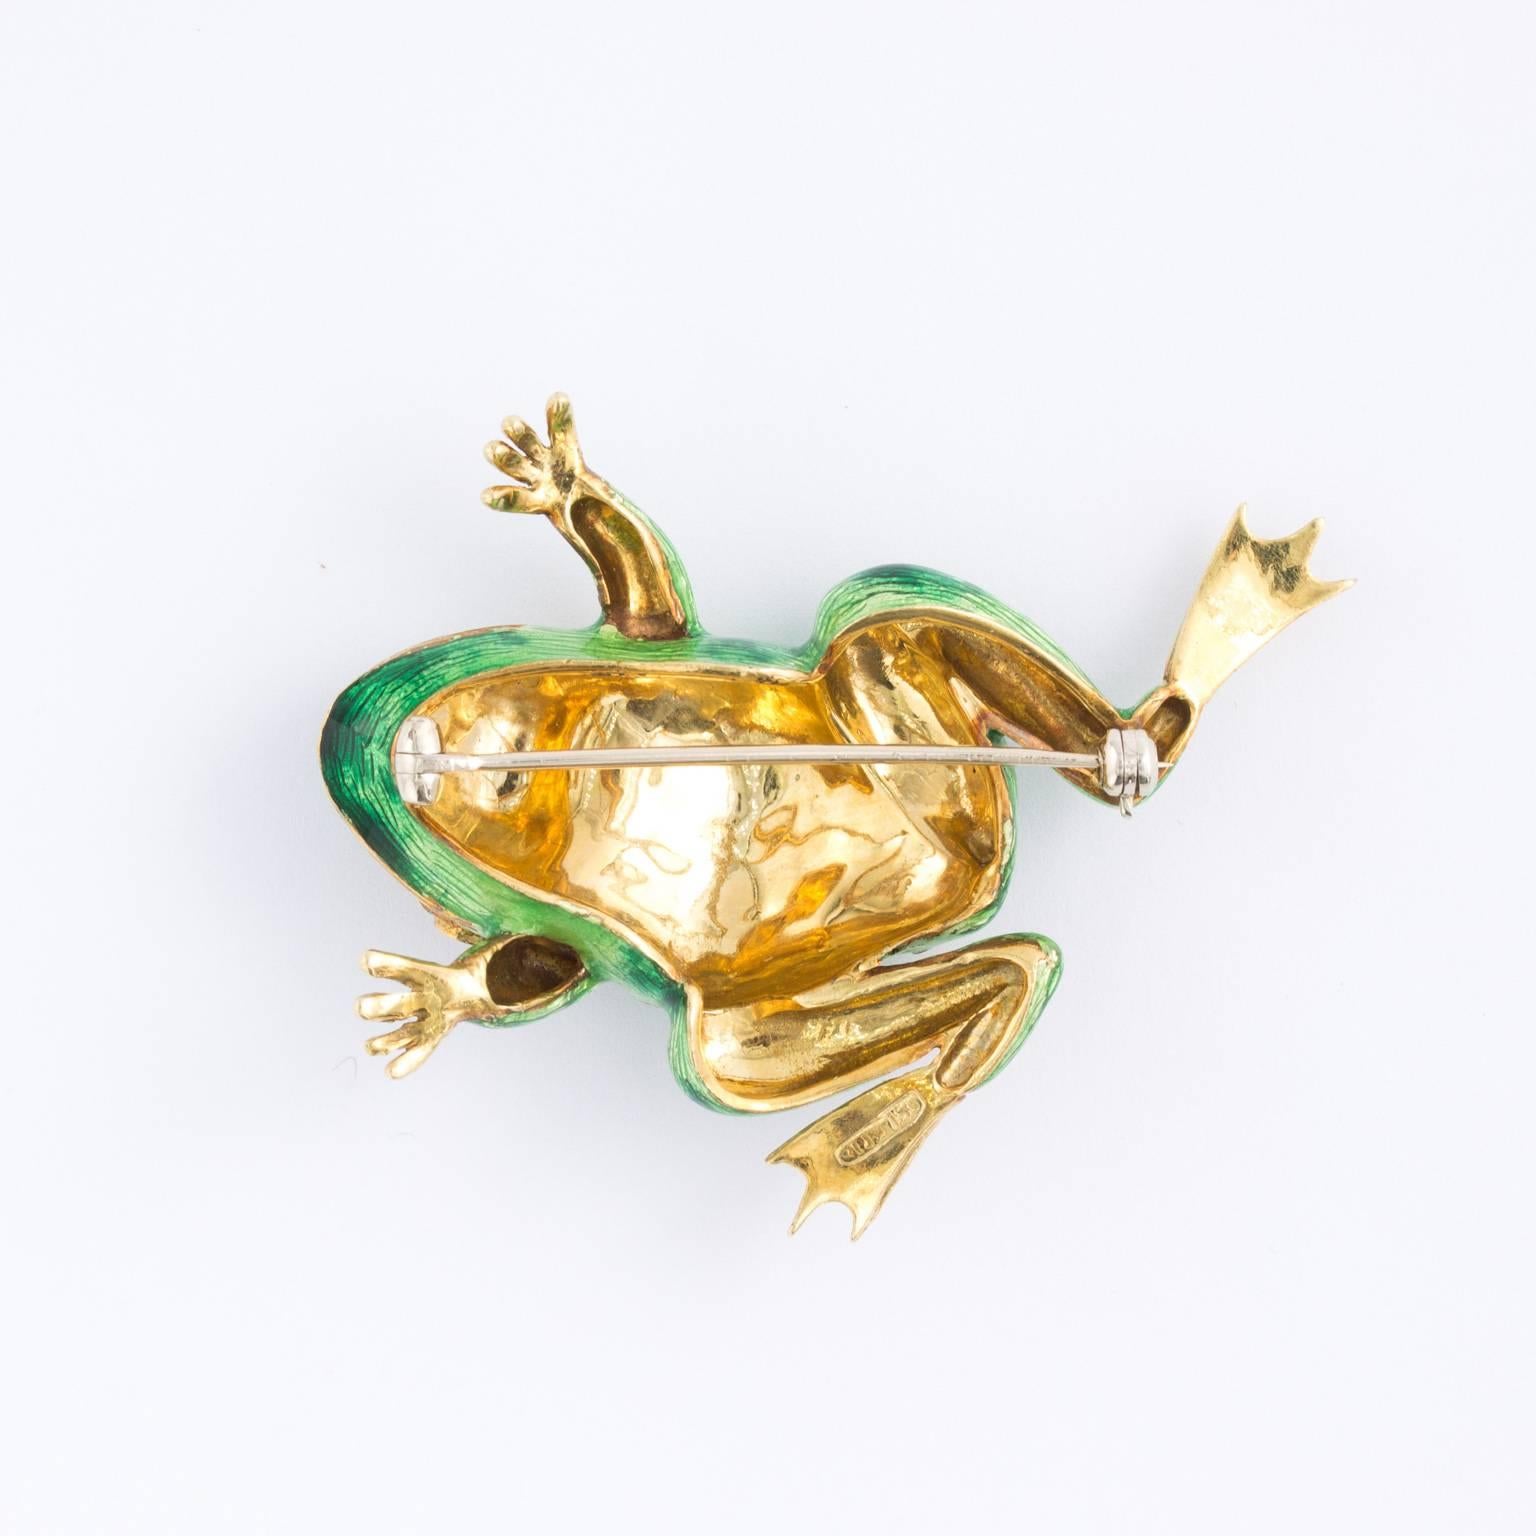 This lovely little frog is wonderfully made with detailed guilloche under green enamel and you can see that on the Frog's back toes. There are also darker green enamel to depict the green dots on frog's back. The eyes are set with two bezel set